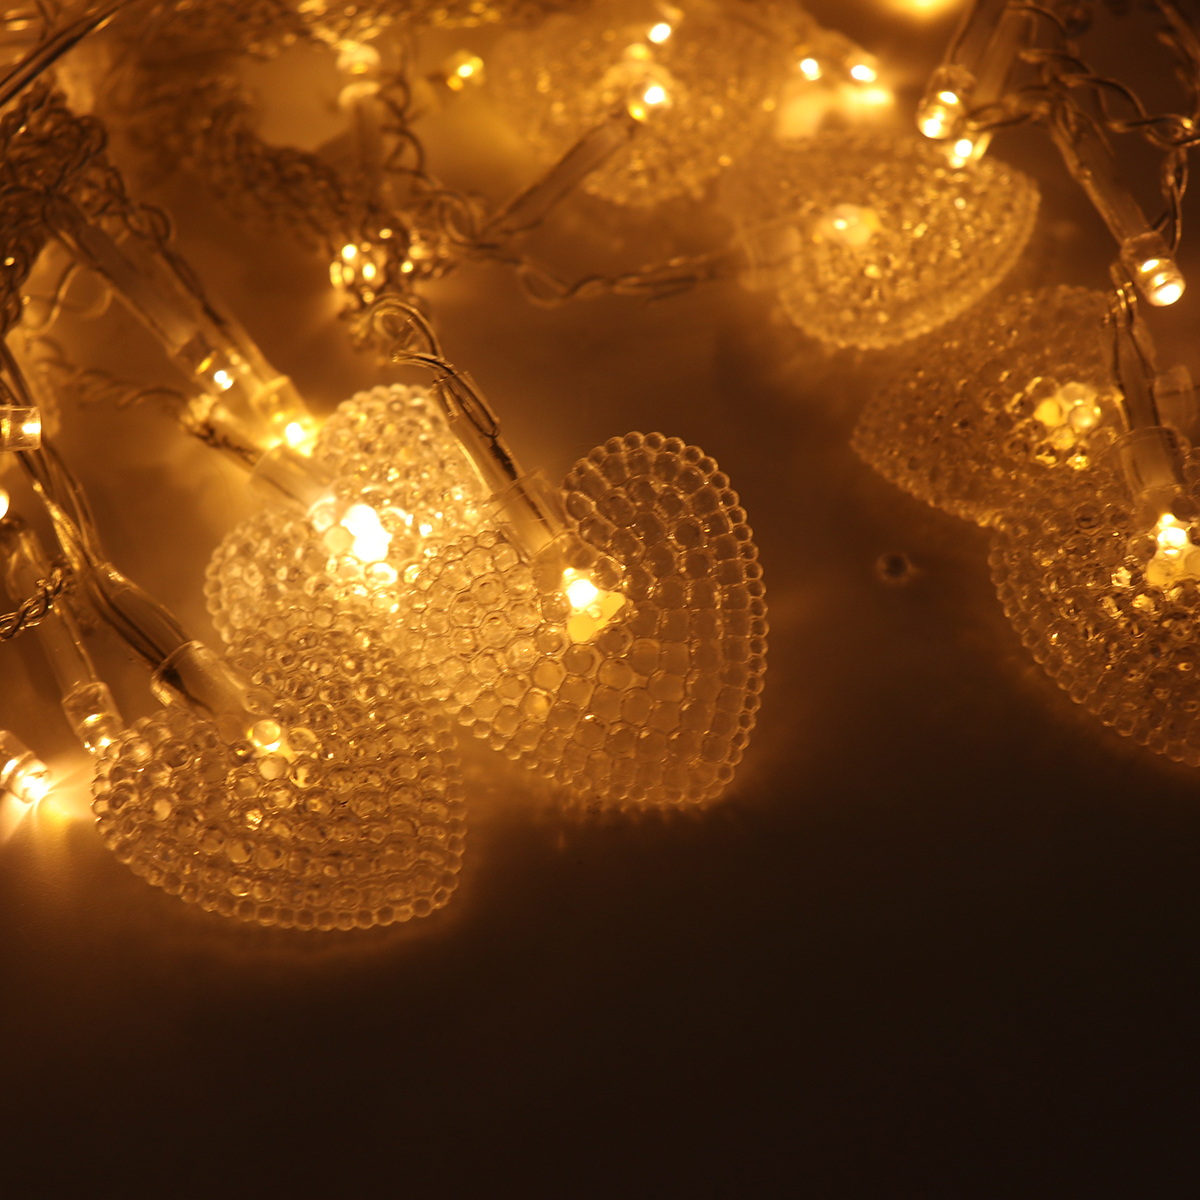 200X150cm-LED-LoveButterfly-Shape-Curtain-Lights-String-USB-Powered-Waterproof-Wall-Light-Hanging-Fa-1704556-12